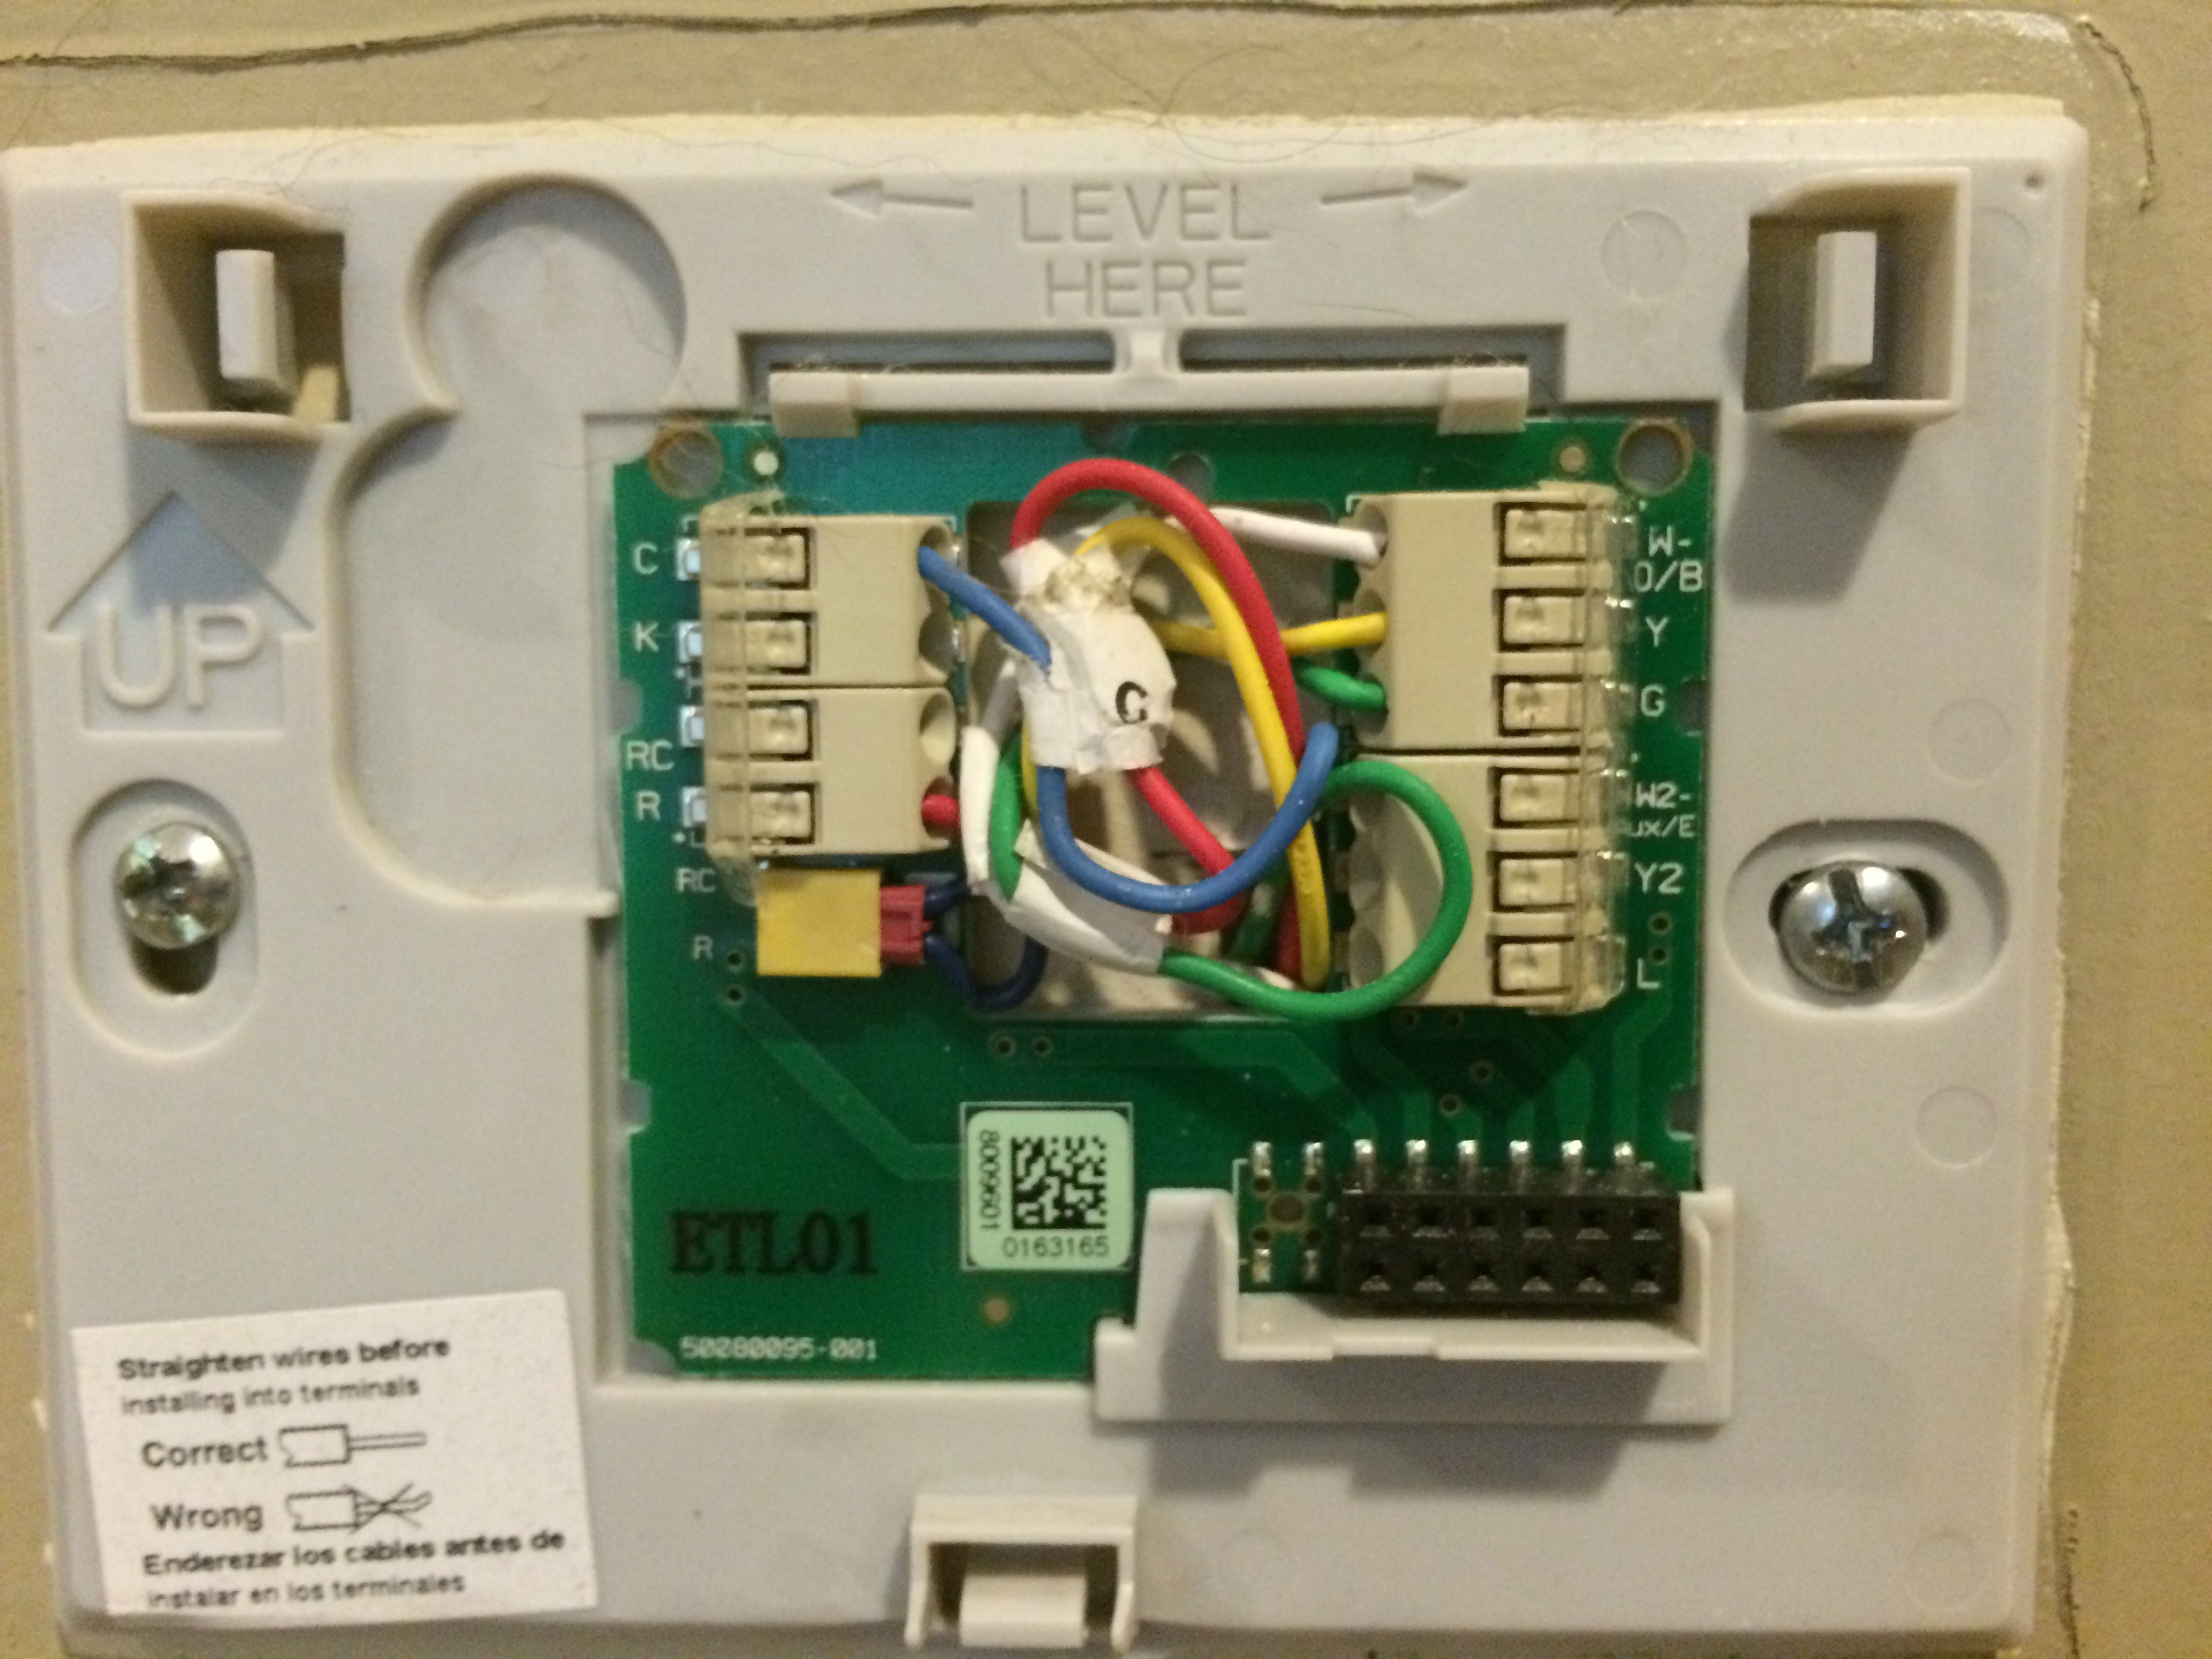 Wiring Diagram for Honeywell Wifi thermostat Best Honeywell Rth6580wf Wiring Diagram